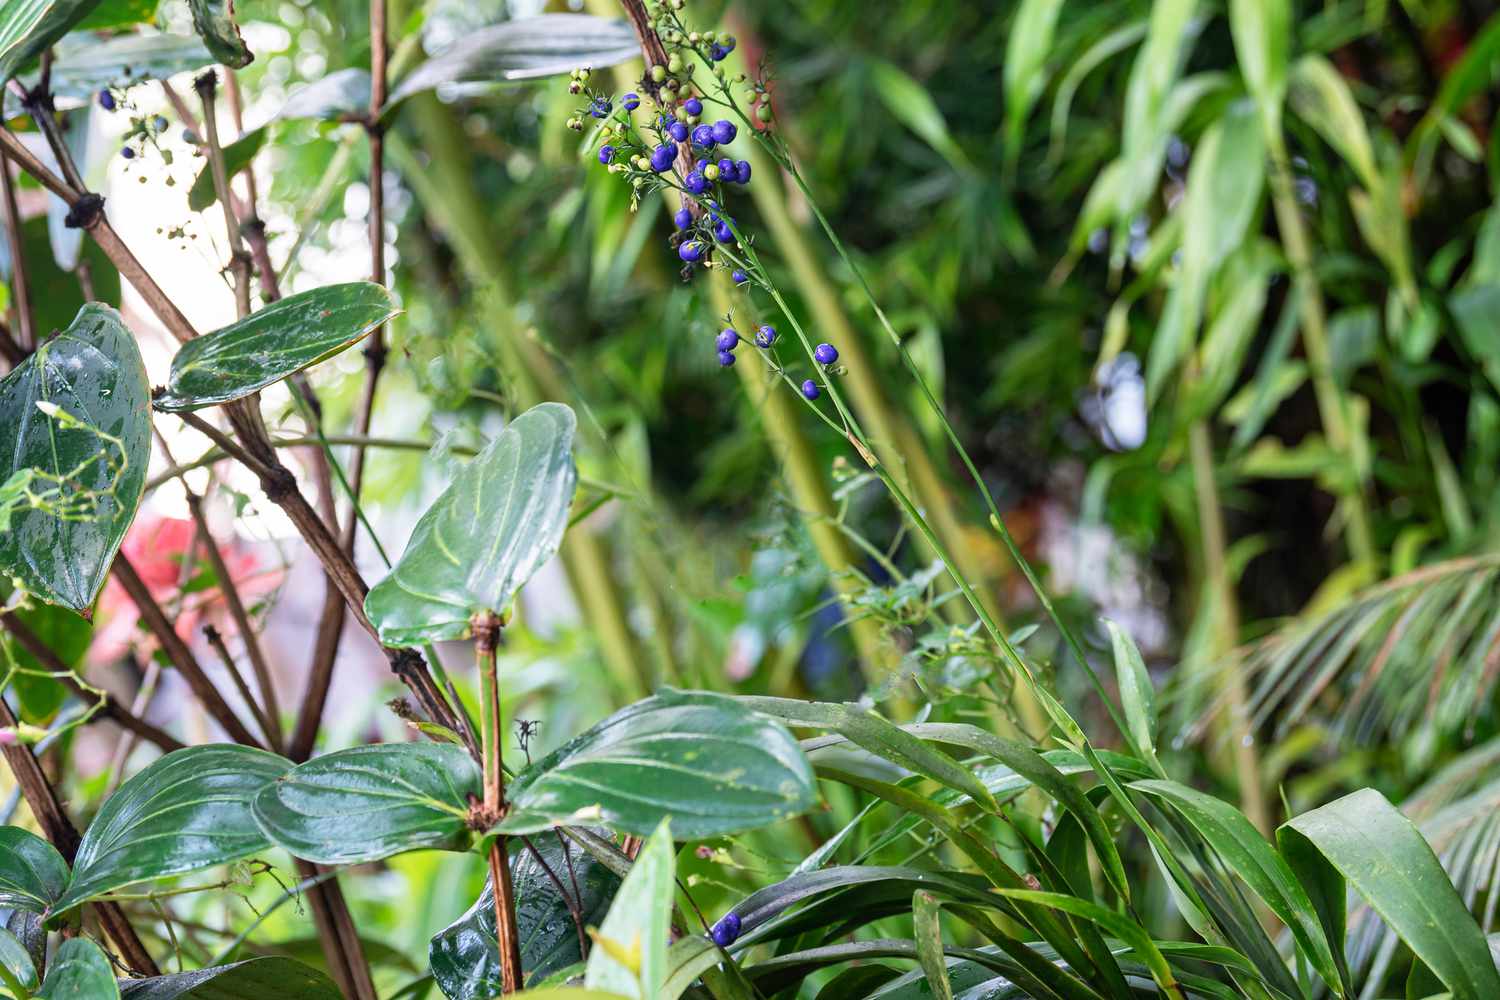 Flax lily plant on thin stalk with purple panicle buds surrounded by foliage